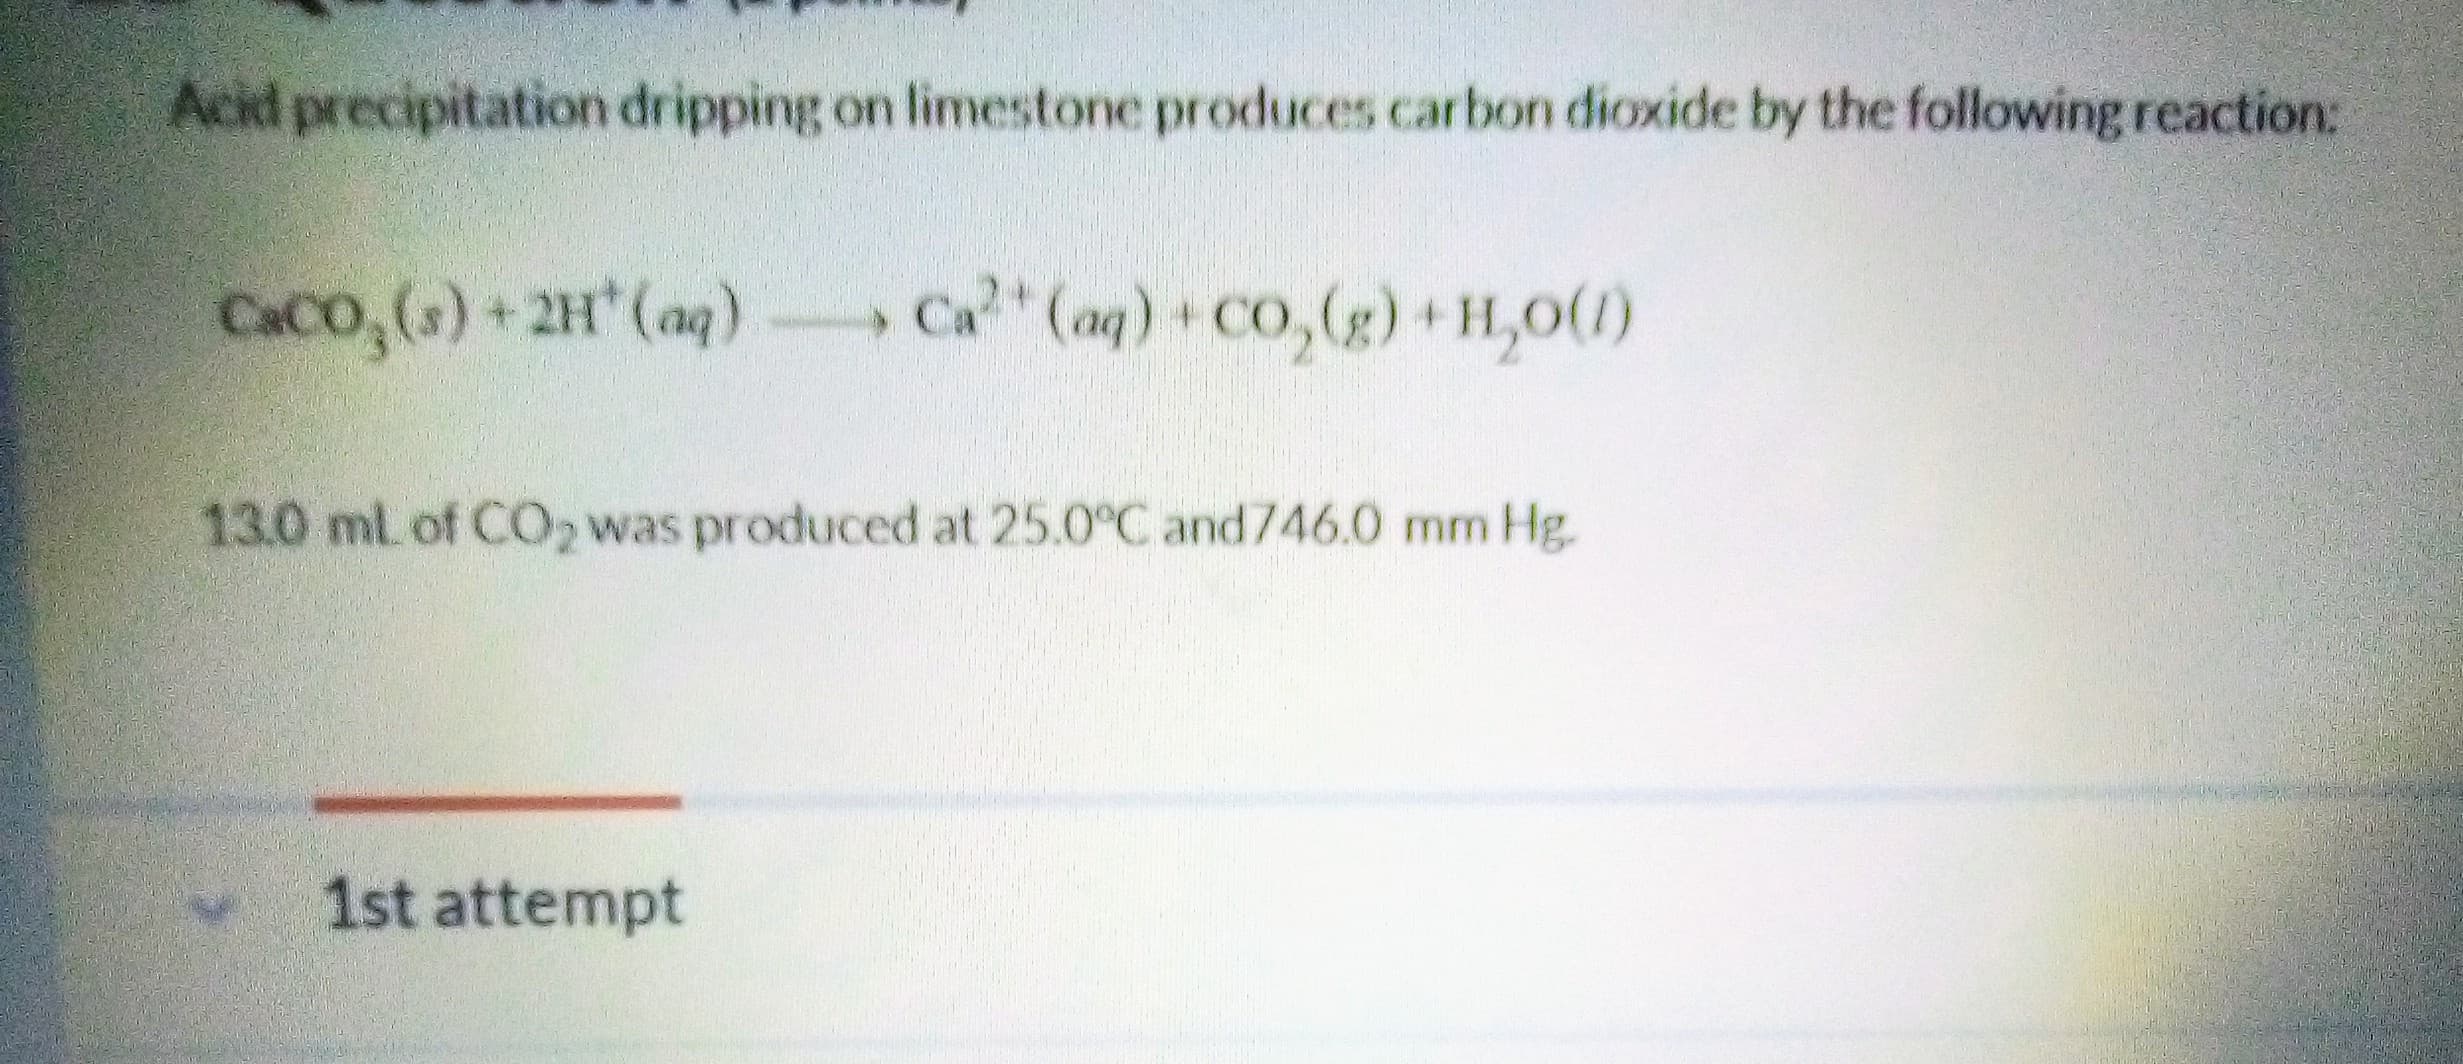 Acid precipitation dripping on limestone produces carbon dioxide by the following reaction:
CACO,()+2H (ag)
Ca (aq) Co,(g)+H,0(1)
13.0 ml. of CO2 was produced at 25.0°C and746.0 mm Hg.
1st attempt
